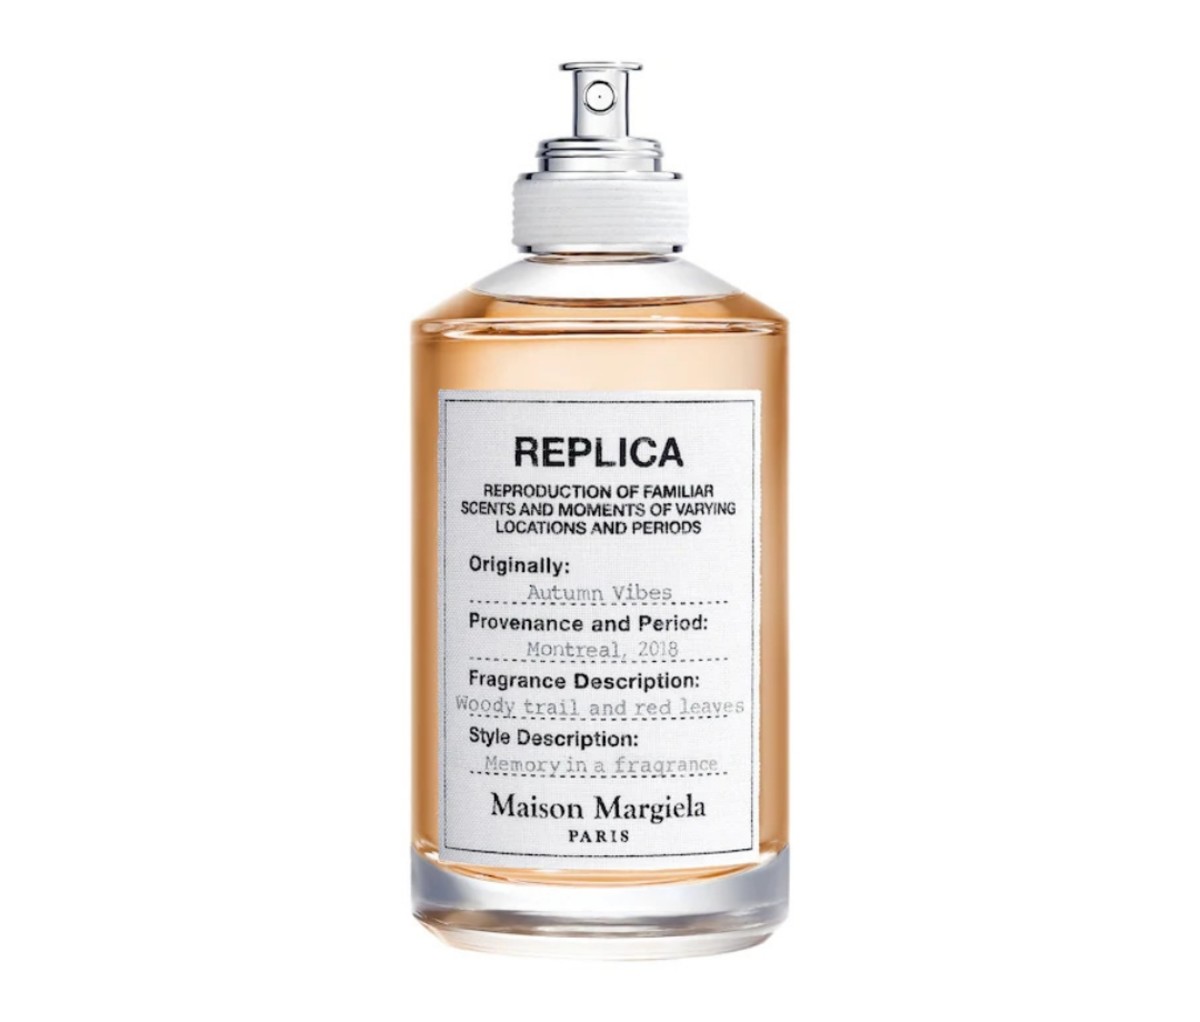 Autumn Vibes by Maison Margiela fall colognes